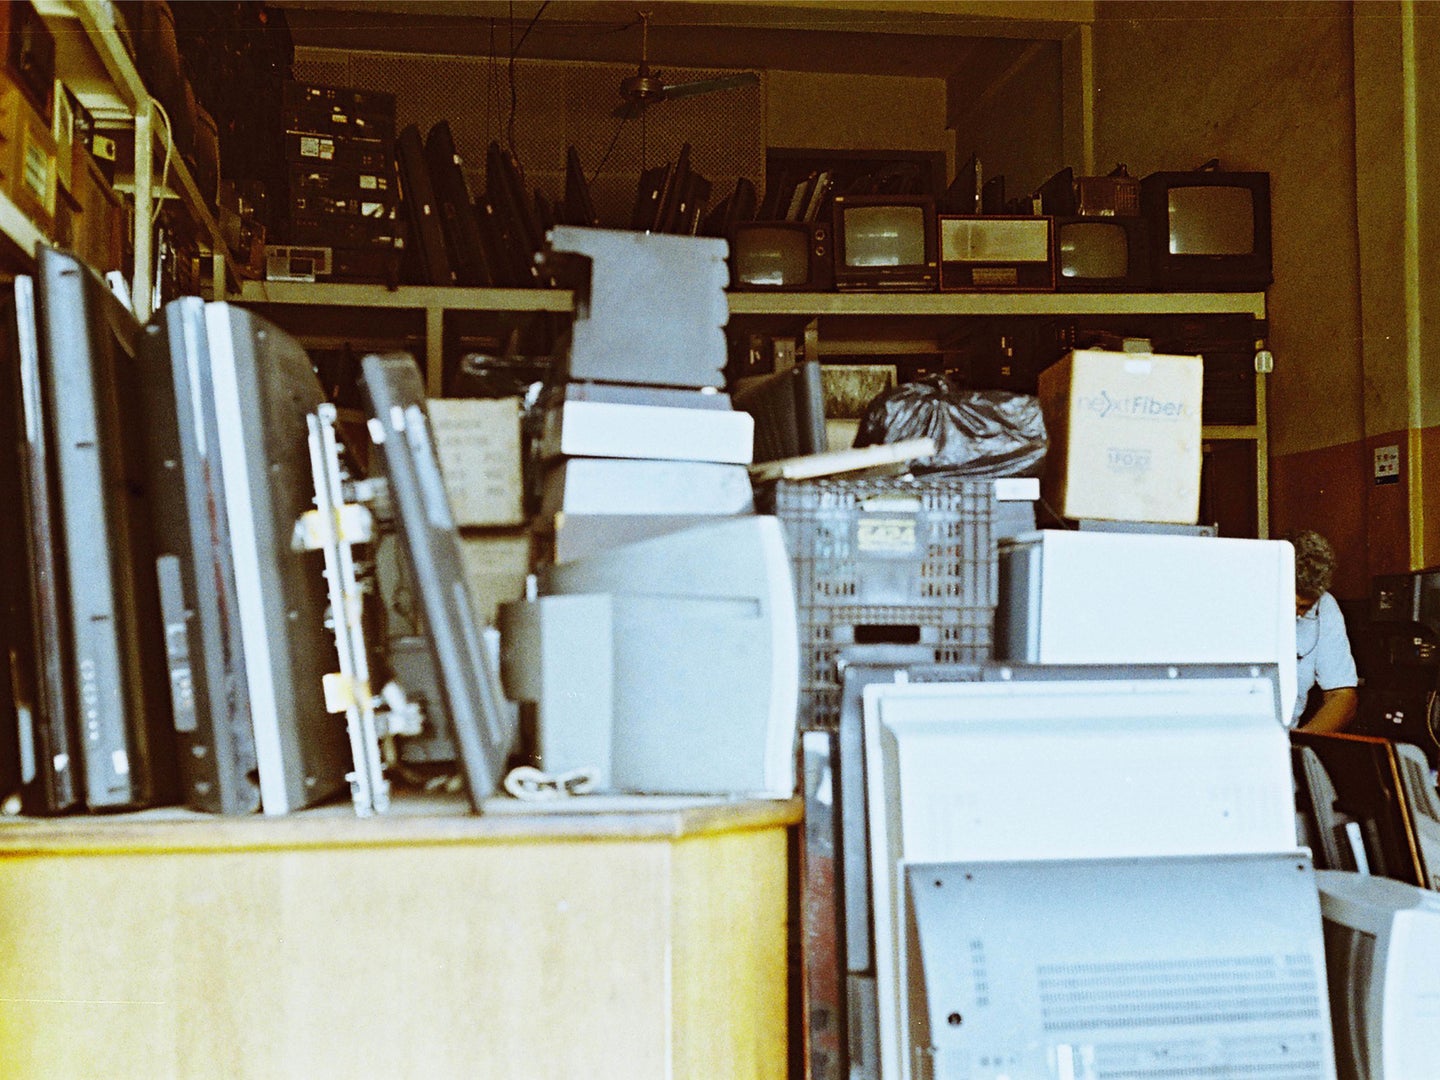 A dim room with a lot of old computers, TVs, and other technology piled up on shelves.